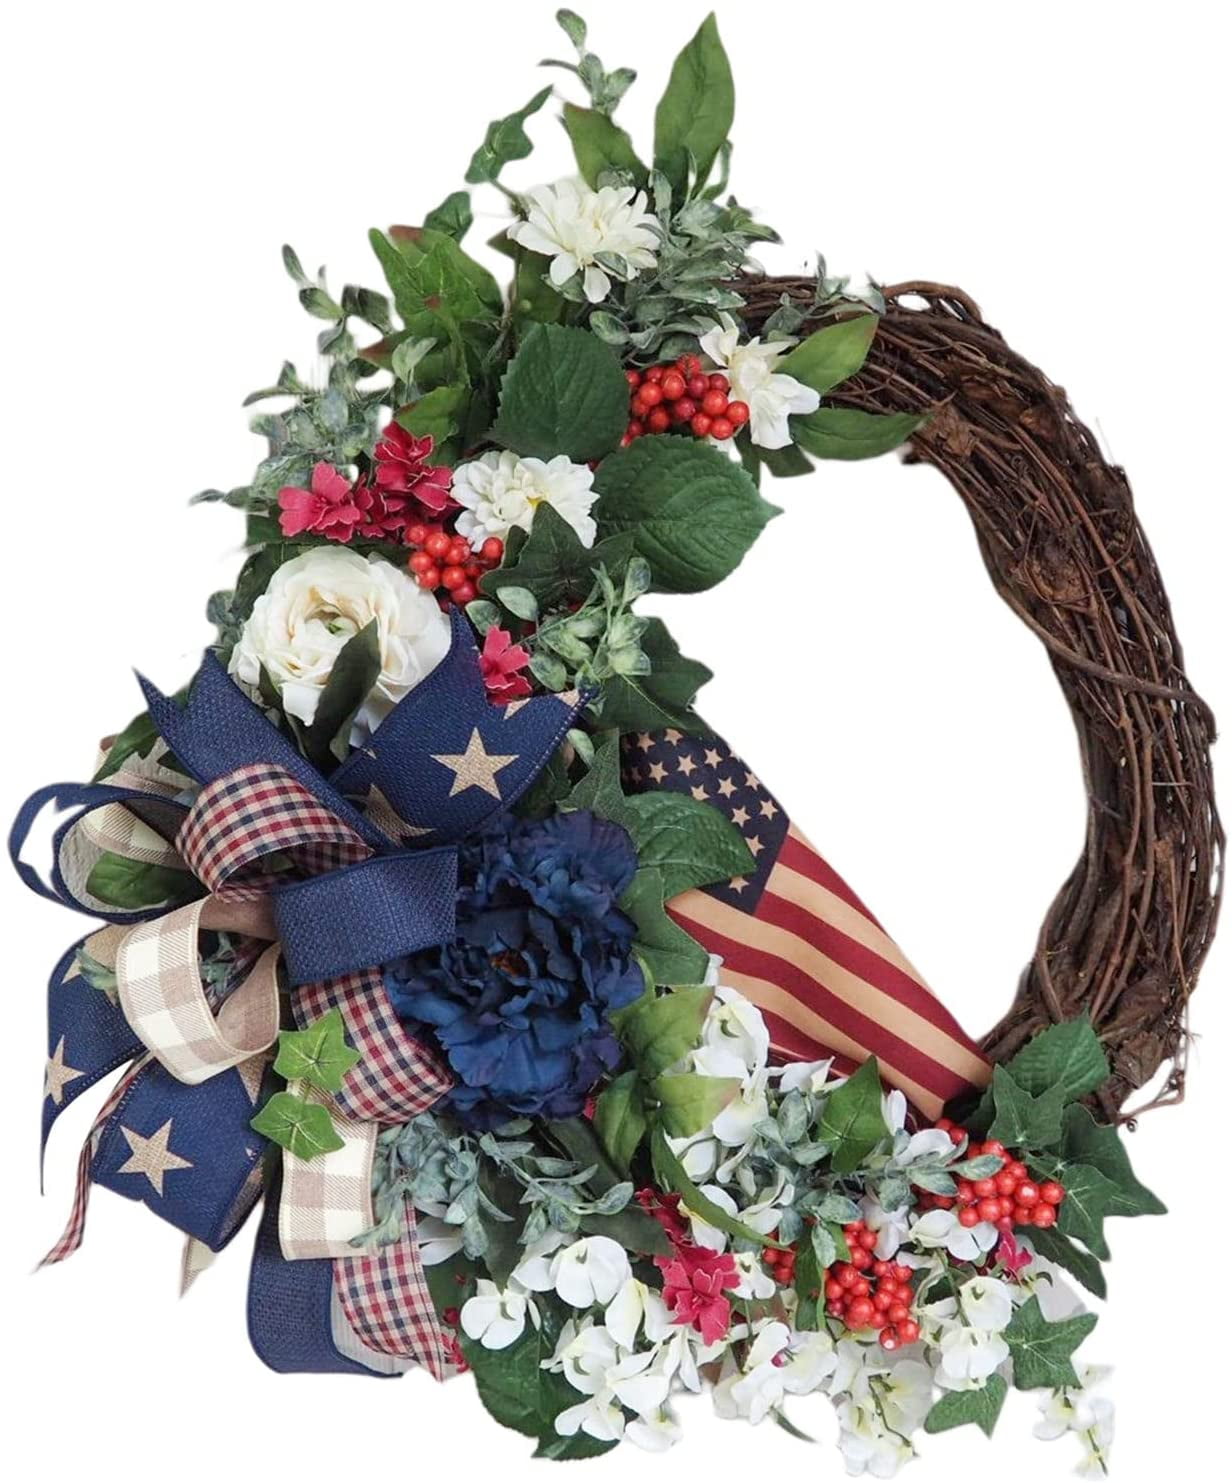 16" Diameter Lighted Patriotic Blossoms 4th of July Welcome Door Wreath 